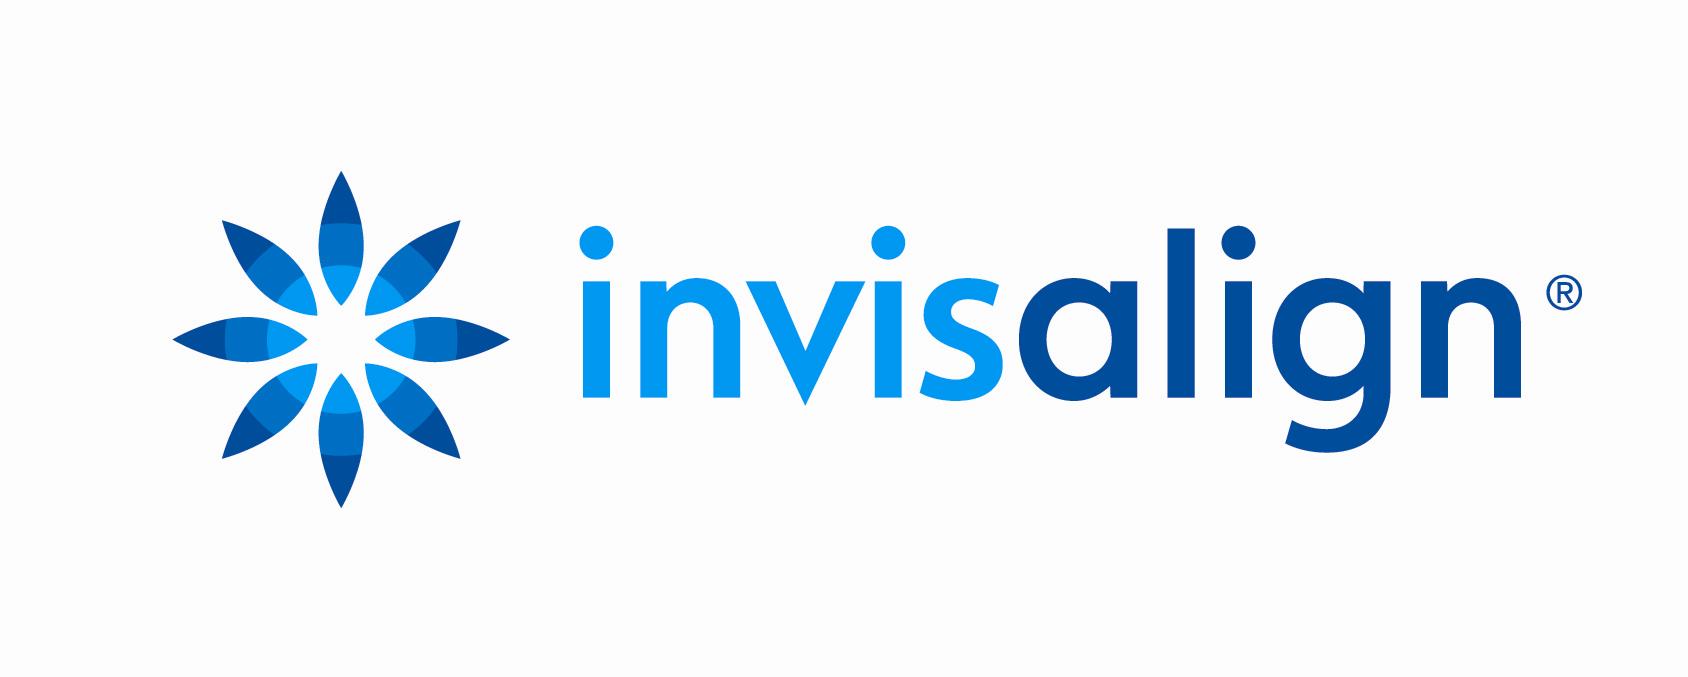 Treatment with Invisalign - Clear Aligners